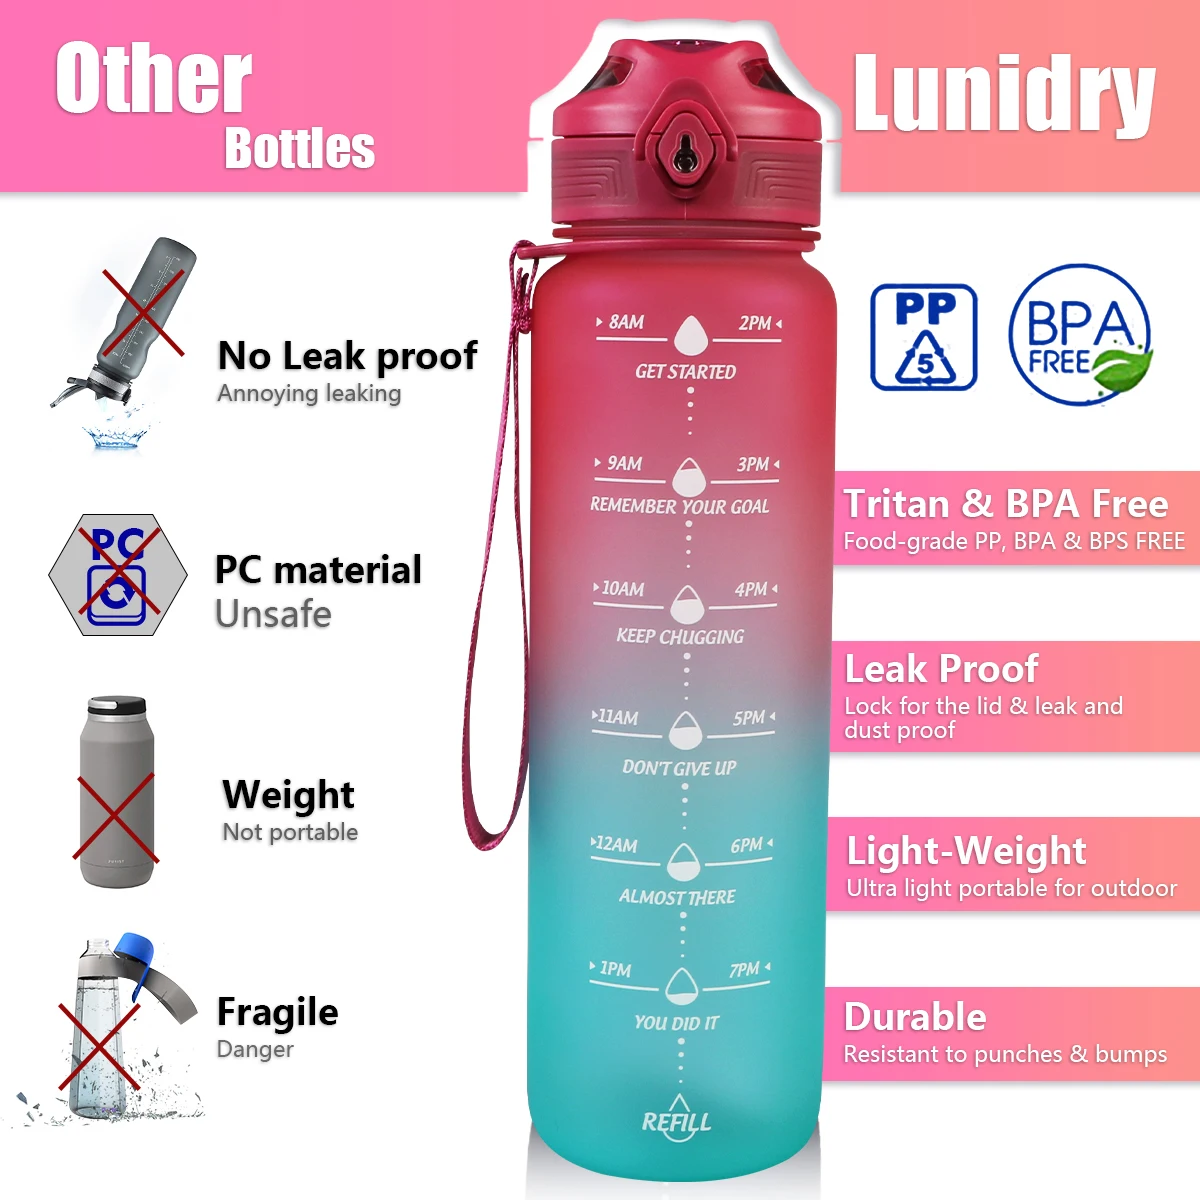 https://ae01.alicdn.com/kf/H37588bacd77048c2a93b0c72882f27623/Lunidry-Water-Bottles-With-Straw-Time-Marker-1L-Motivational-Water-Jug-BPA-Free-Leakproof-Large-Capacity.jpg